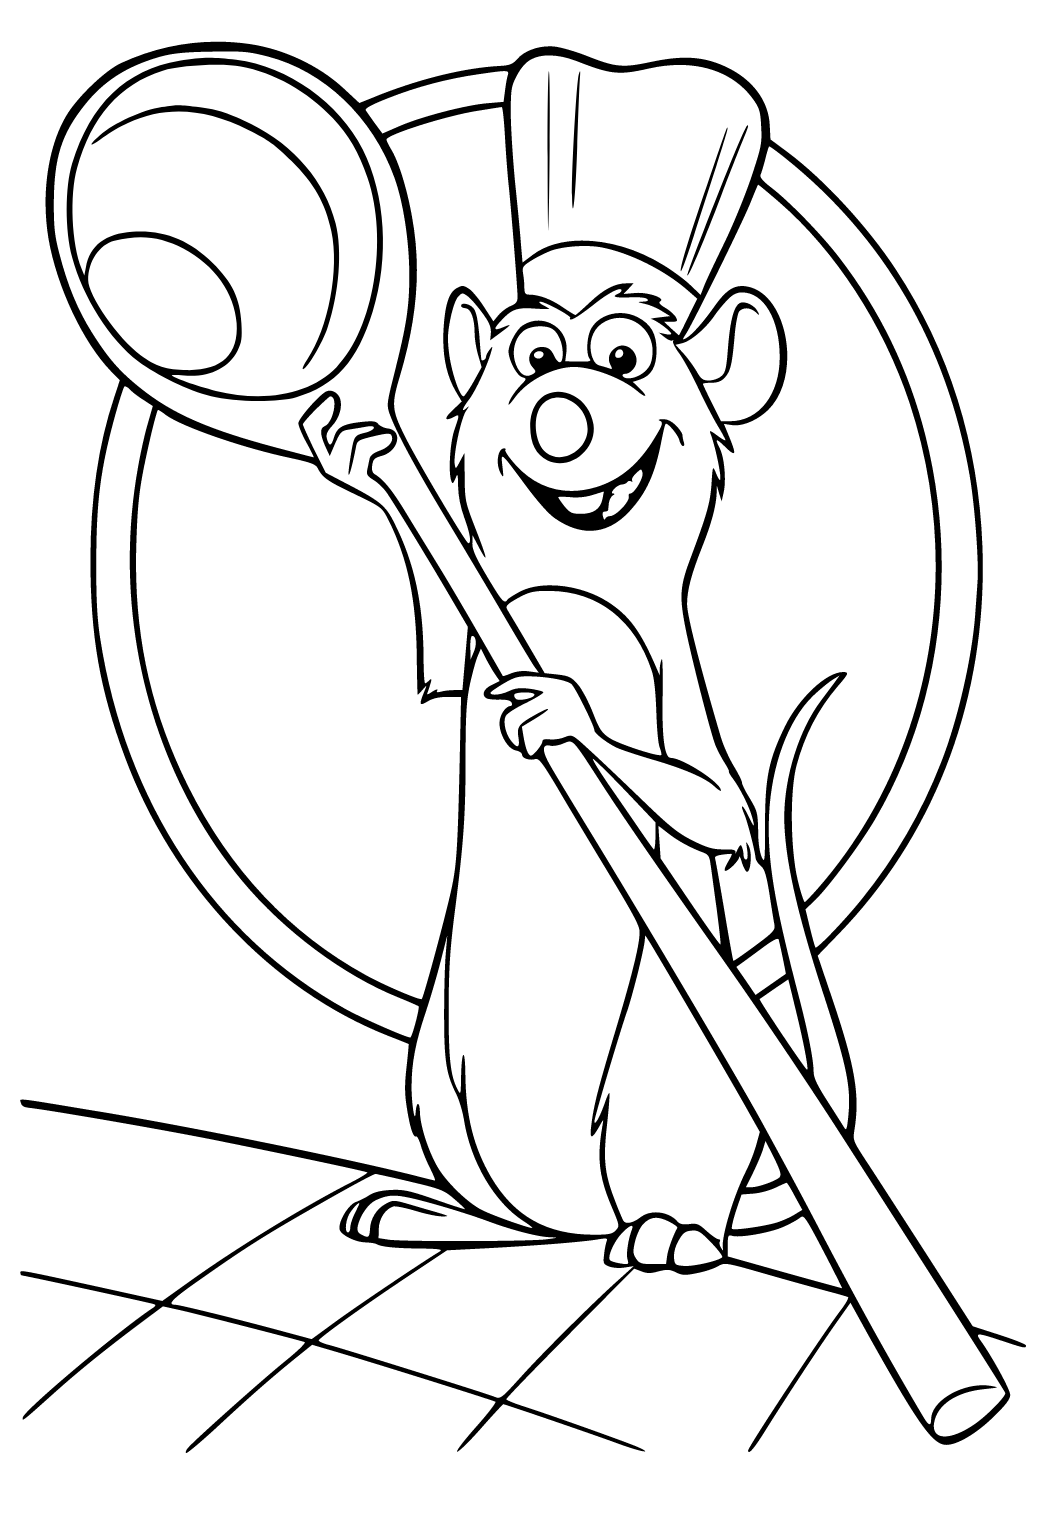 Free printable ratatouille hero coloring page for adults and kids